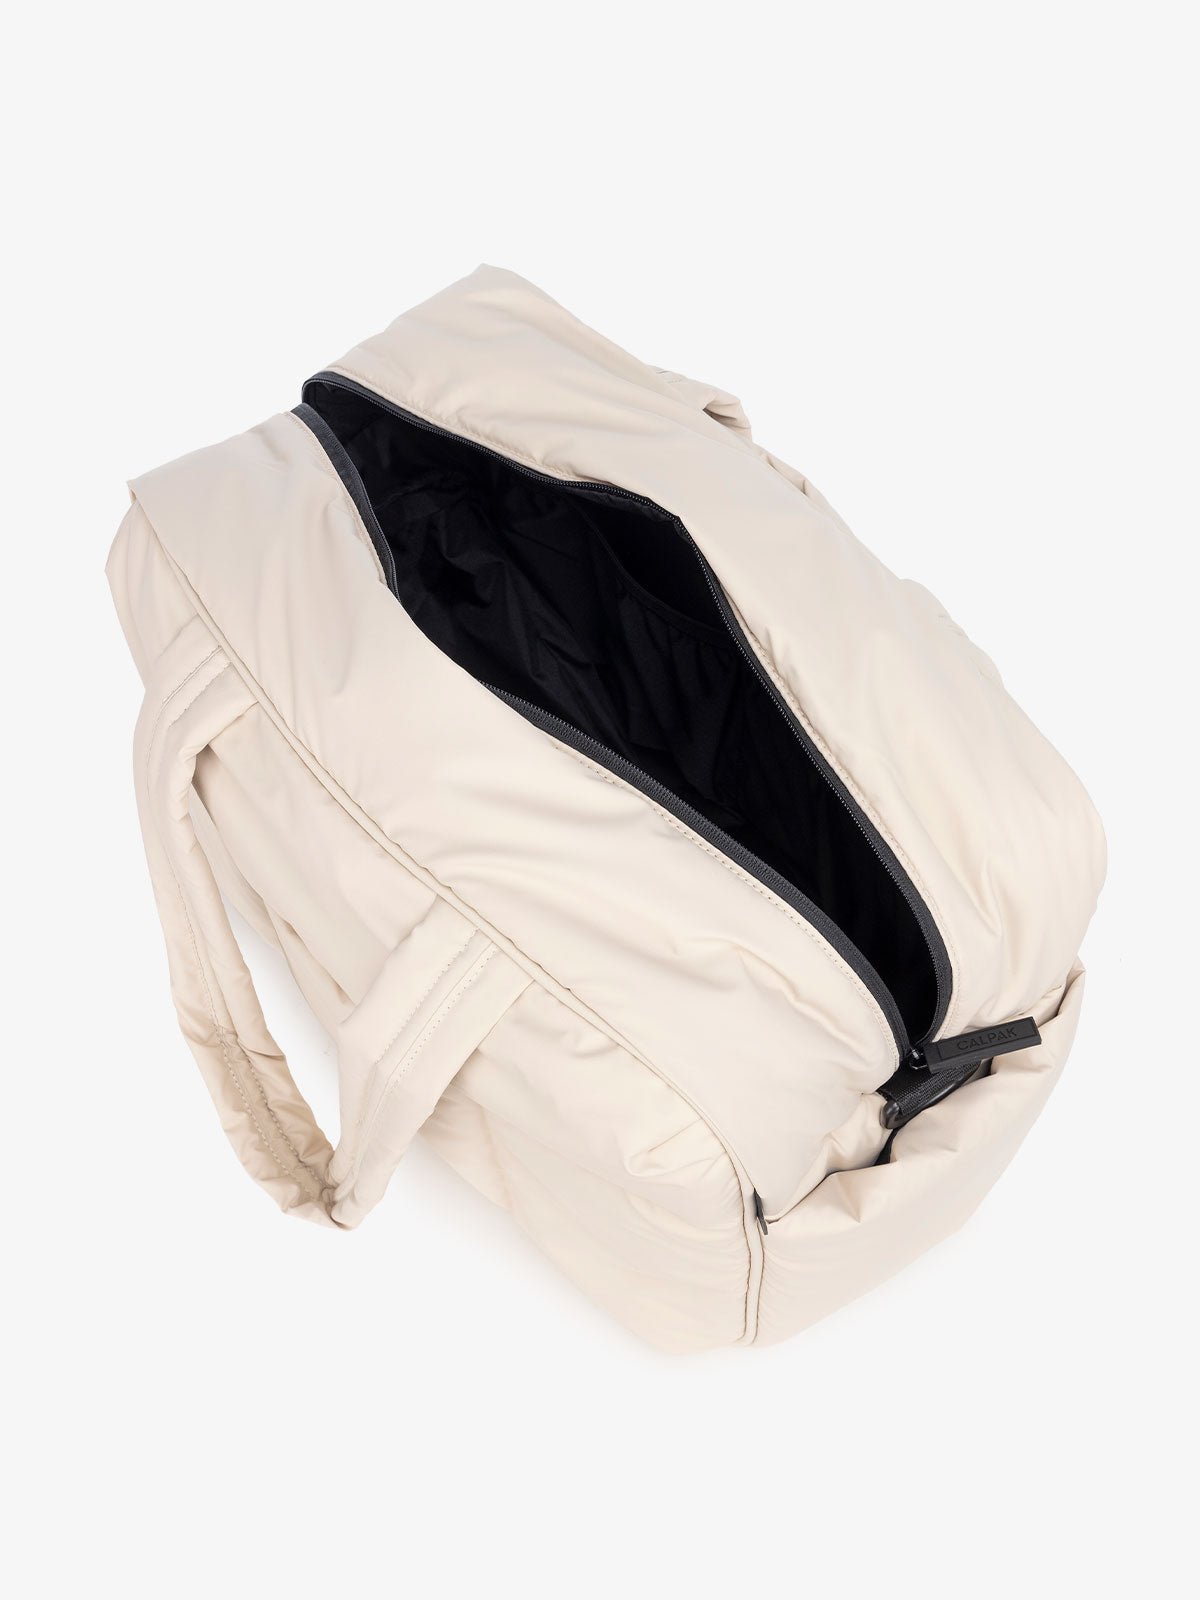 Luka duffel bag interior with multiple interior pockets in ivory